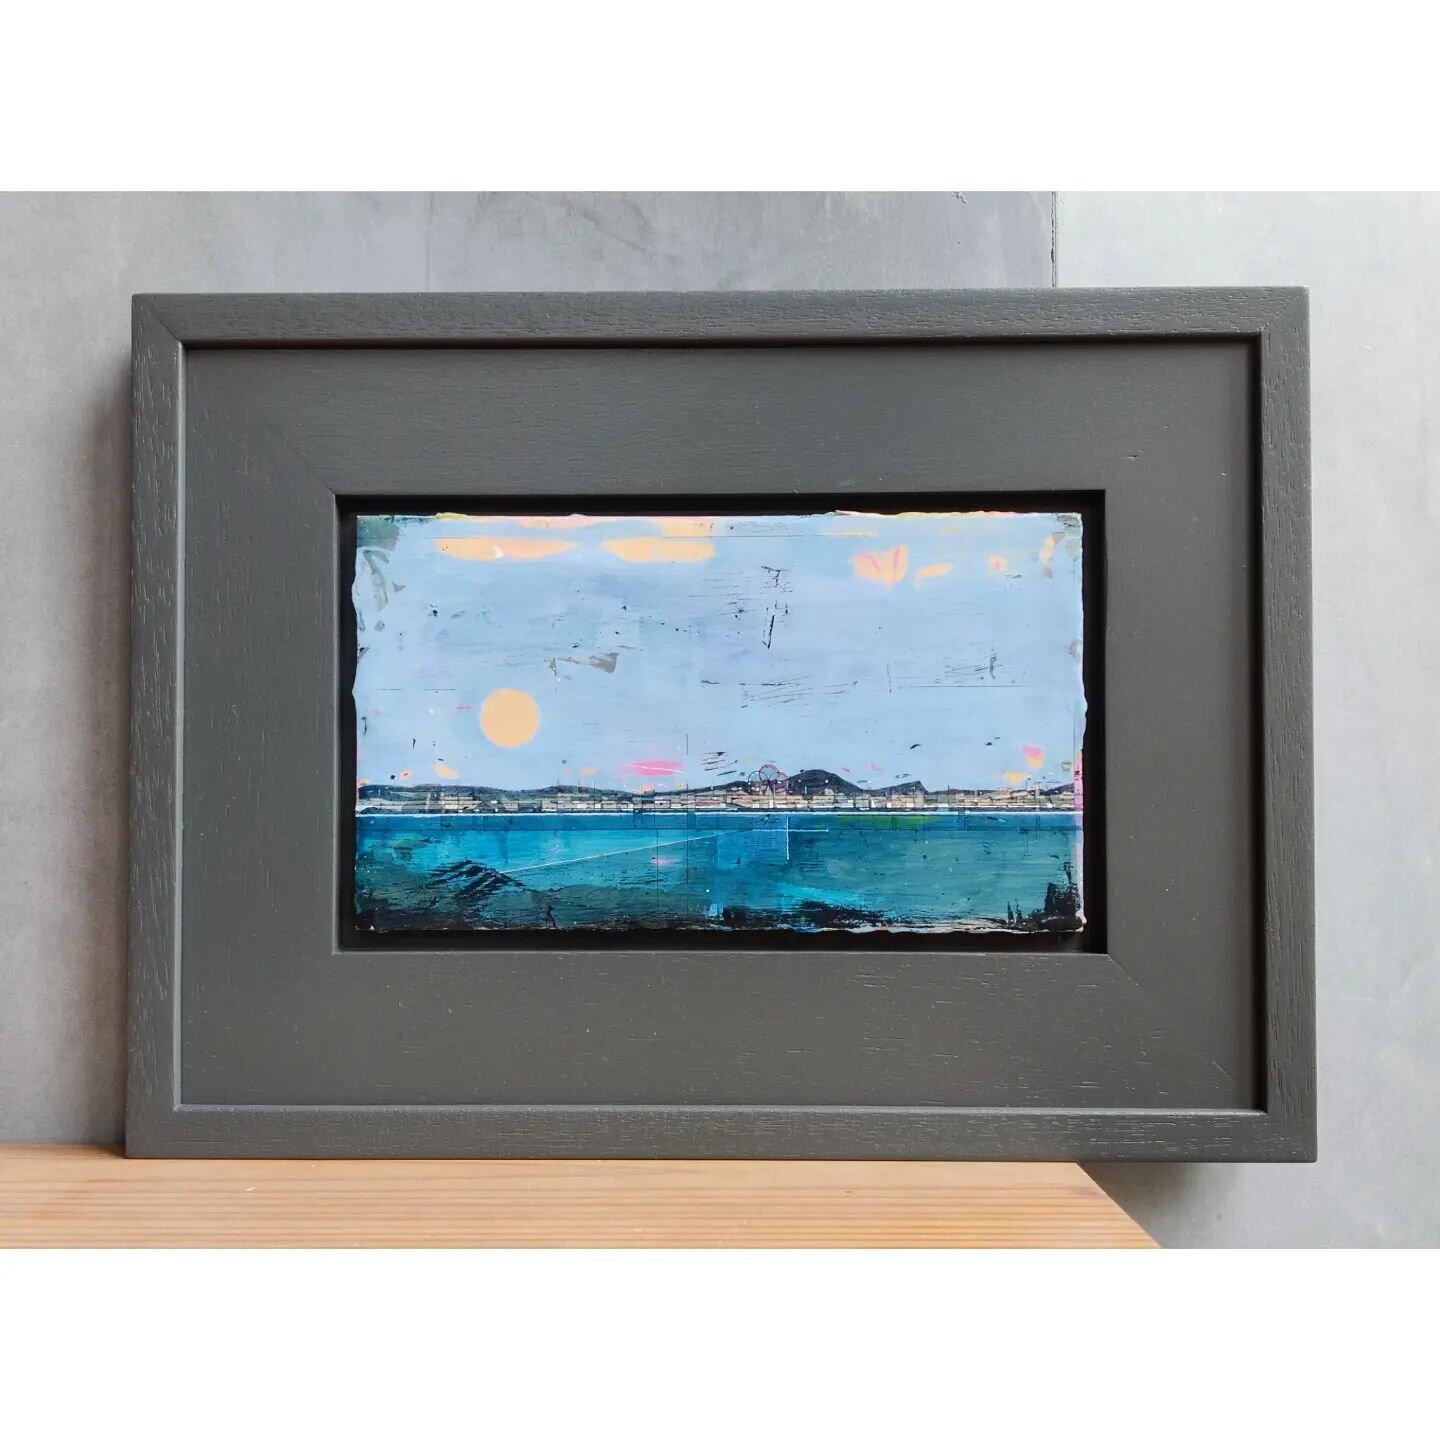 New work framed and on its way down south.
.
.
.
.
.
.
.
.
.
.
.
.
.
.
#smallpainting #smallpaintings #scottishart #scottishpainting #seascapepainting